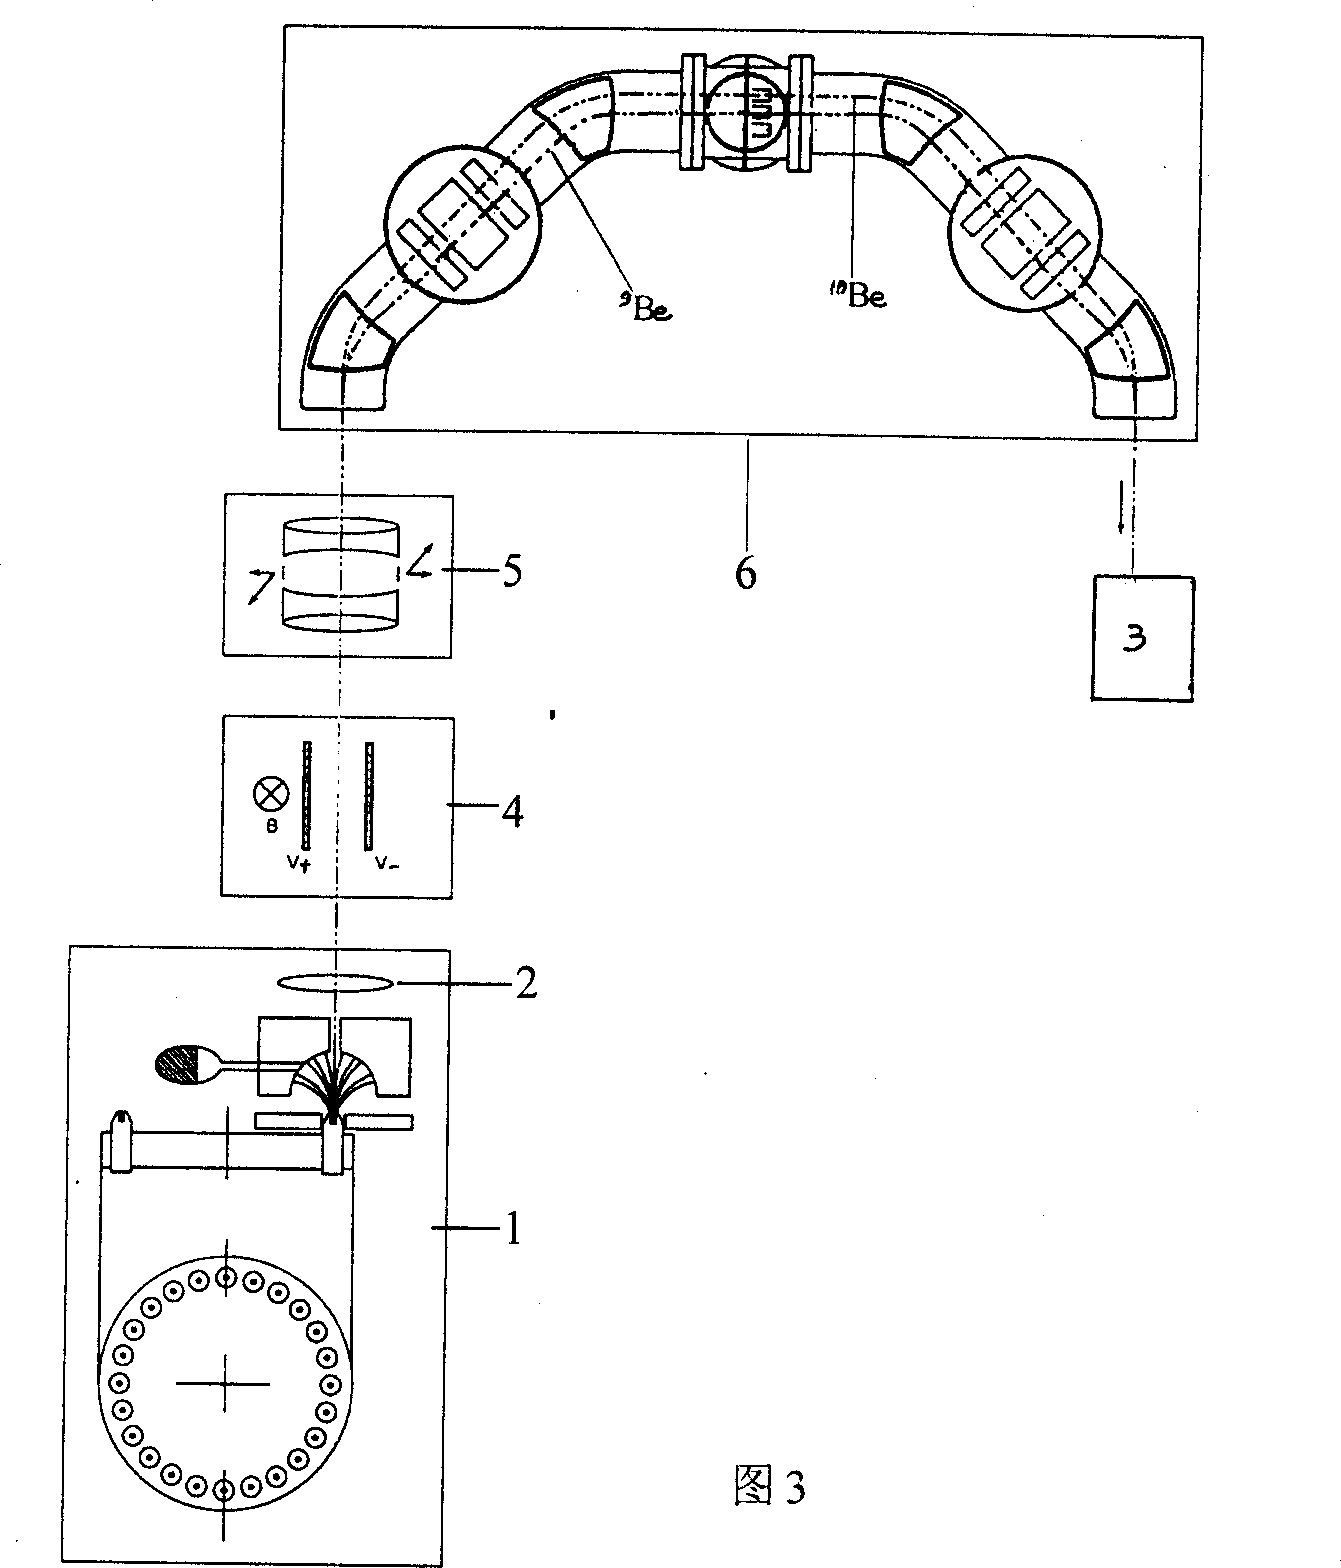 Double-injected tandom accelerator mass spectrometer